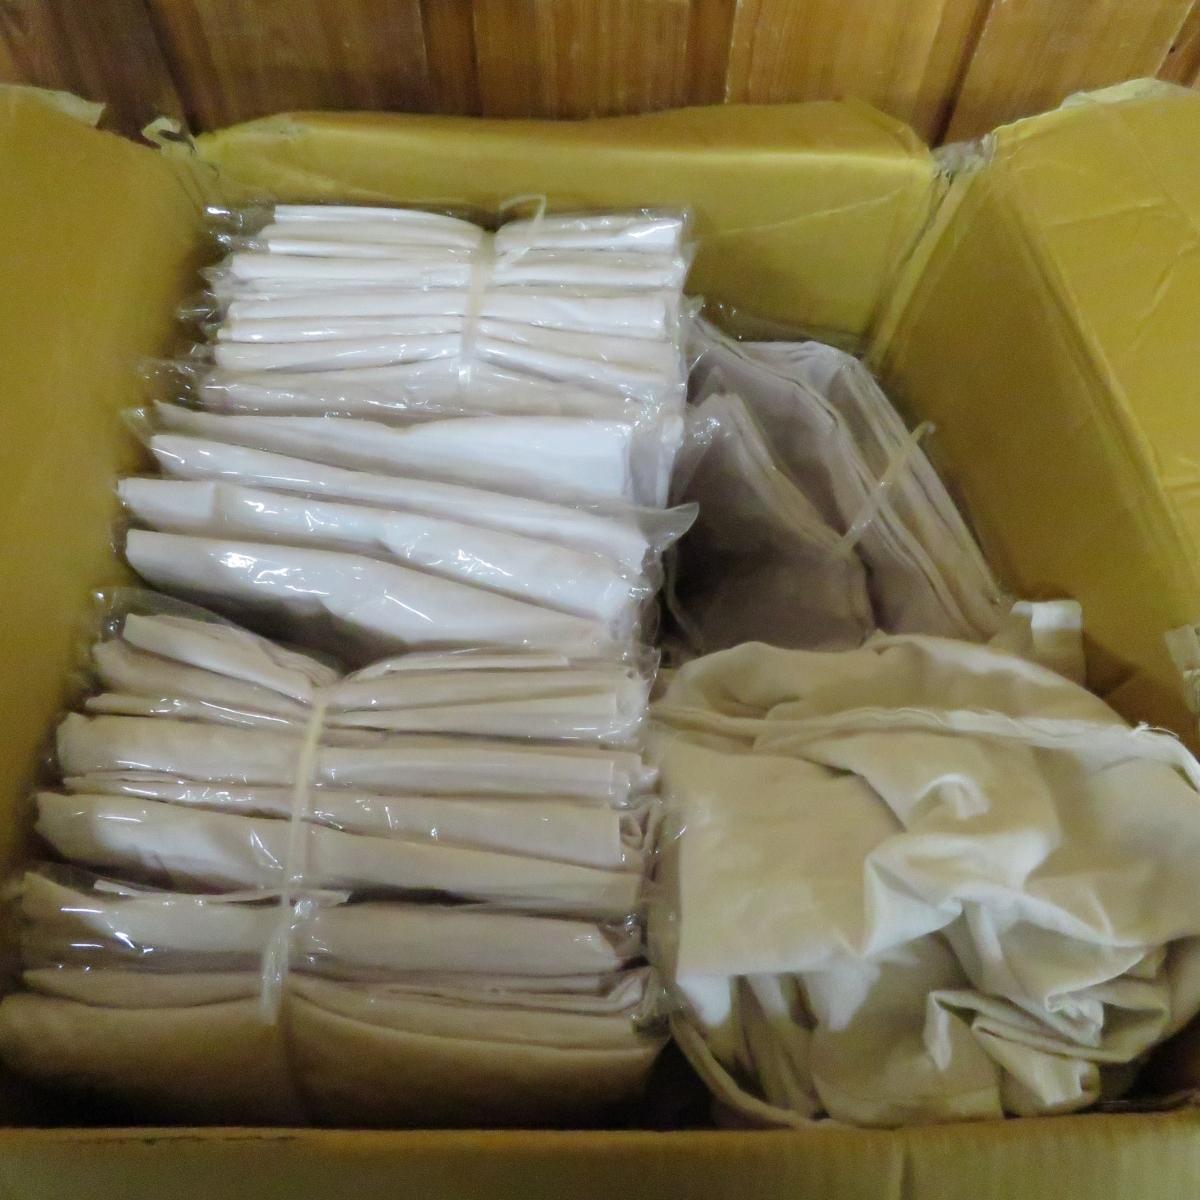 2 Boxes of New Black and White Fisherman Pants